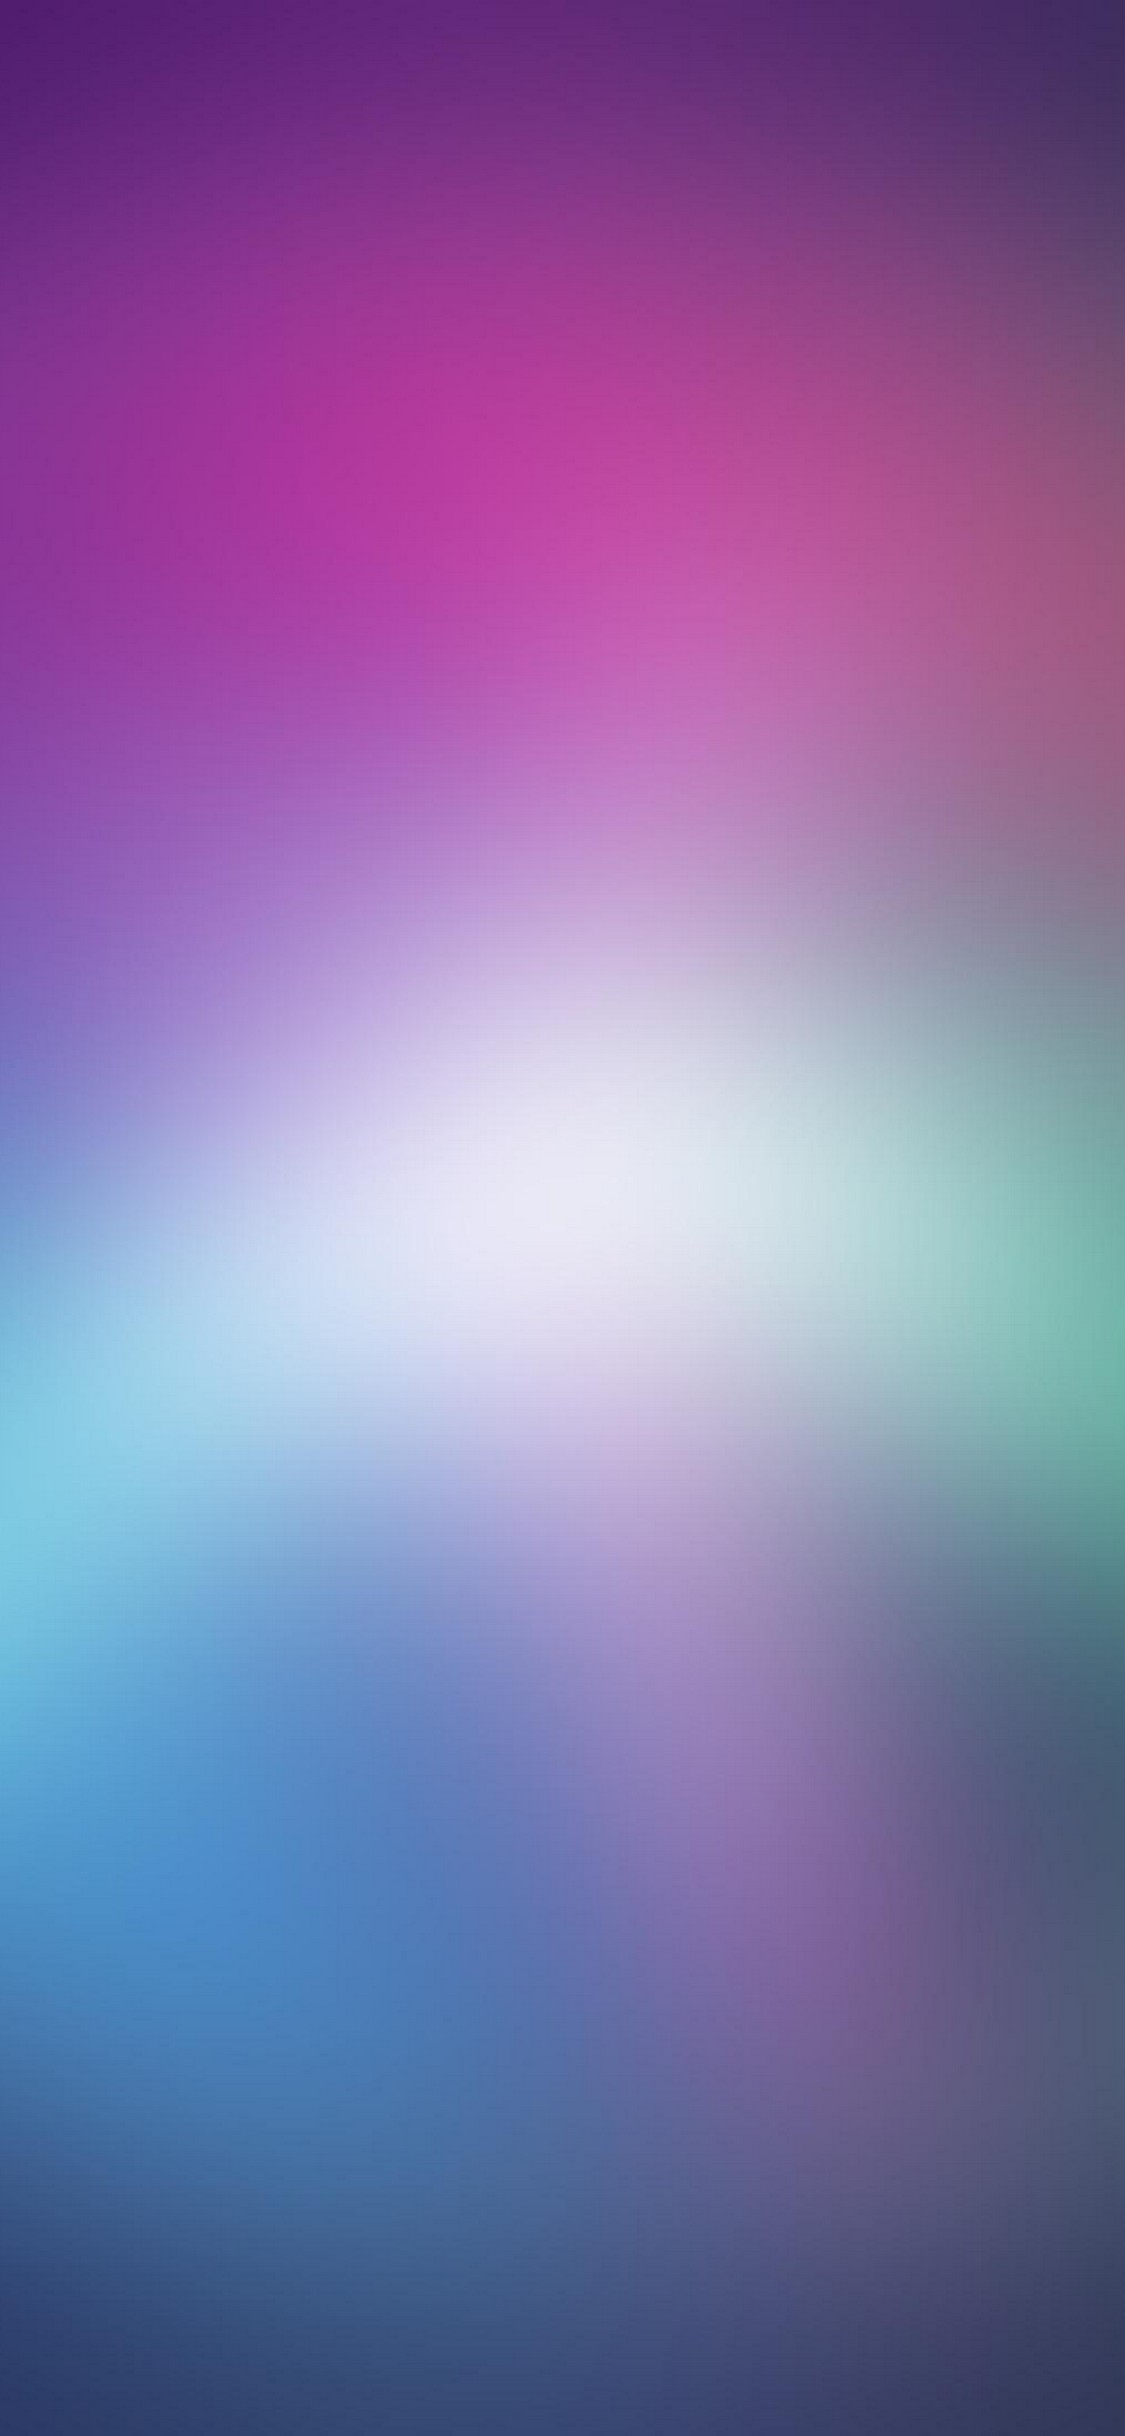 iPhone X Wallpaper Size with high-resolution 1125x2436 pixel. You can set as wallpaper for Apple iPhone X, XS Max, XR, 8, 7, 6, SE, iPad. Enjoy and share your favorite HD wallpapers and background images